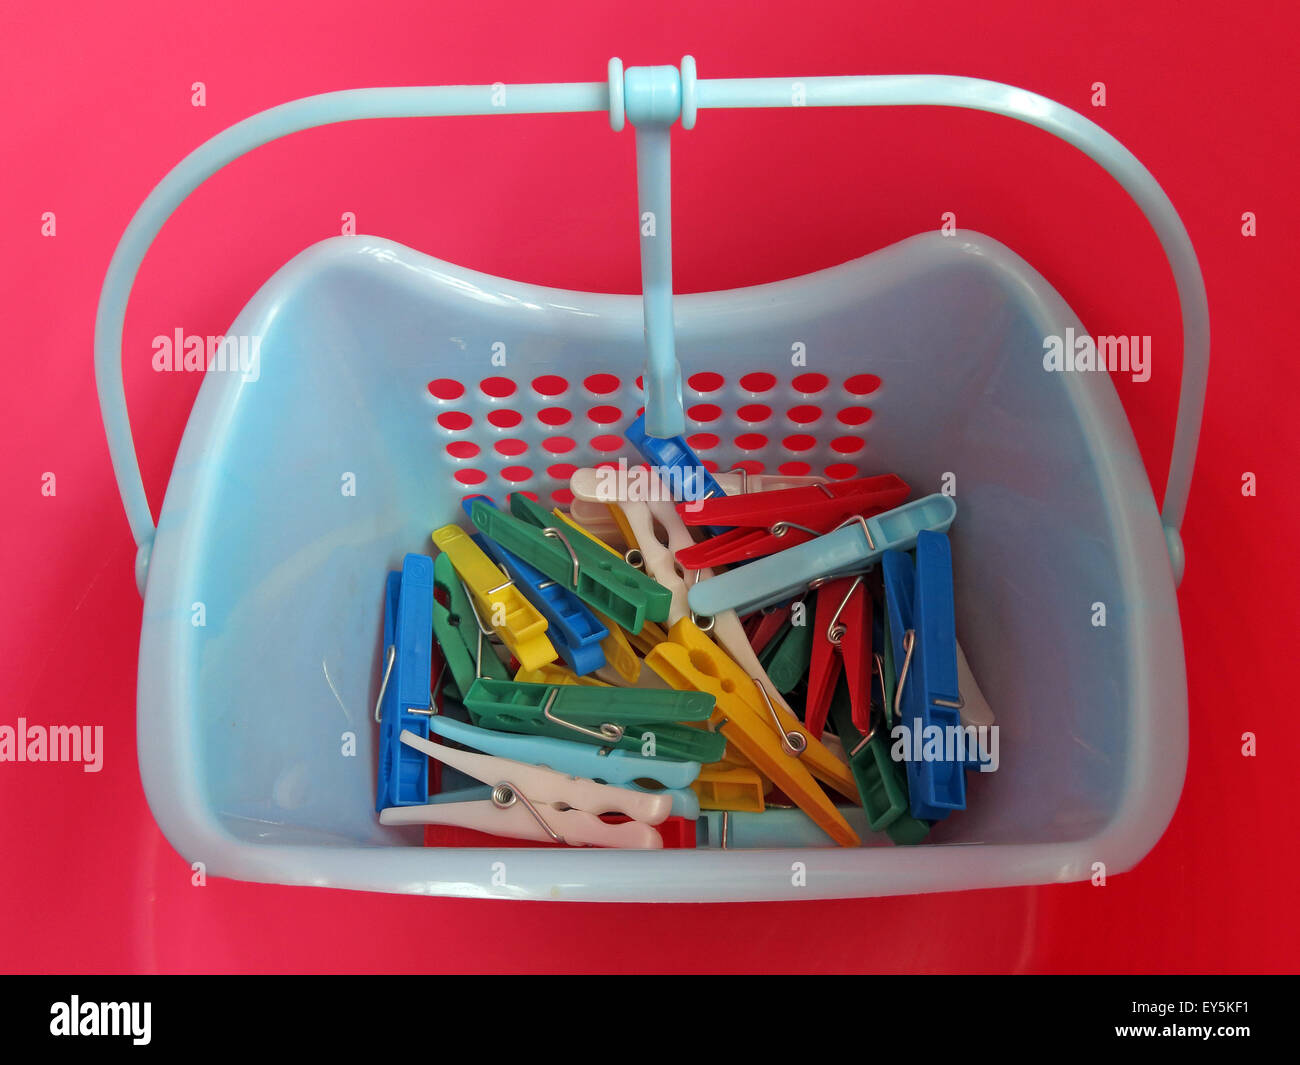 Bright Washday clothes pegs for washing line, in red,blue, yellow,green basket Stock Photo